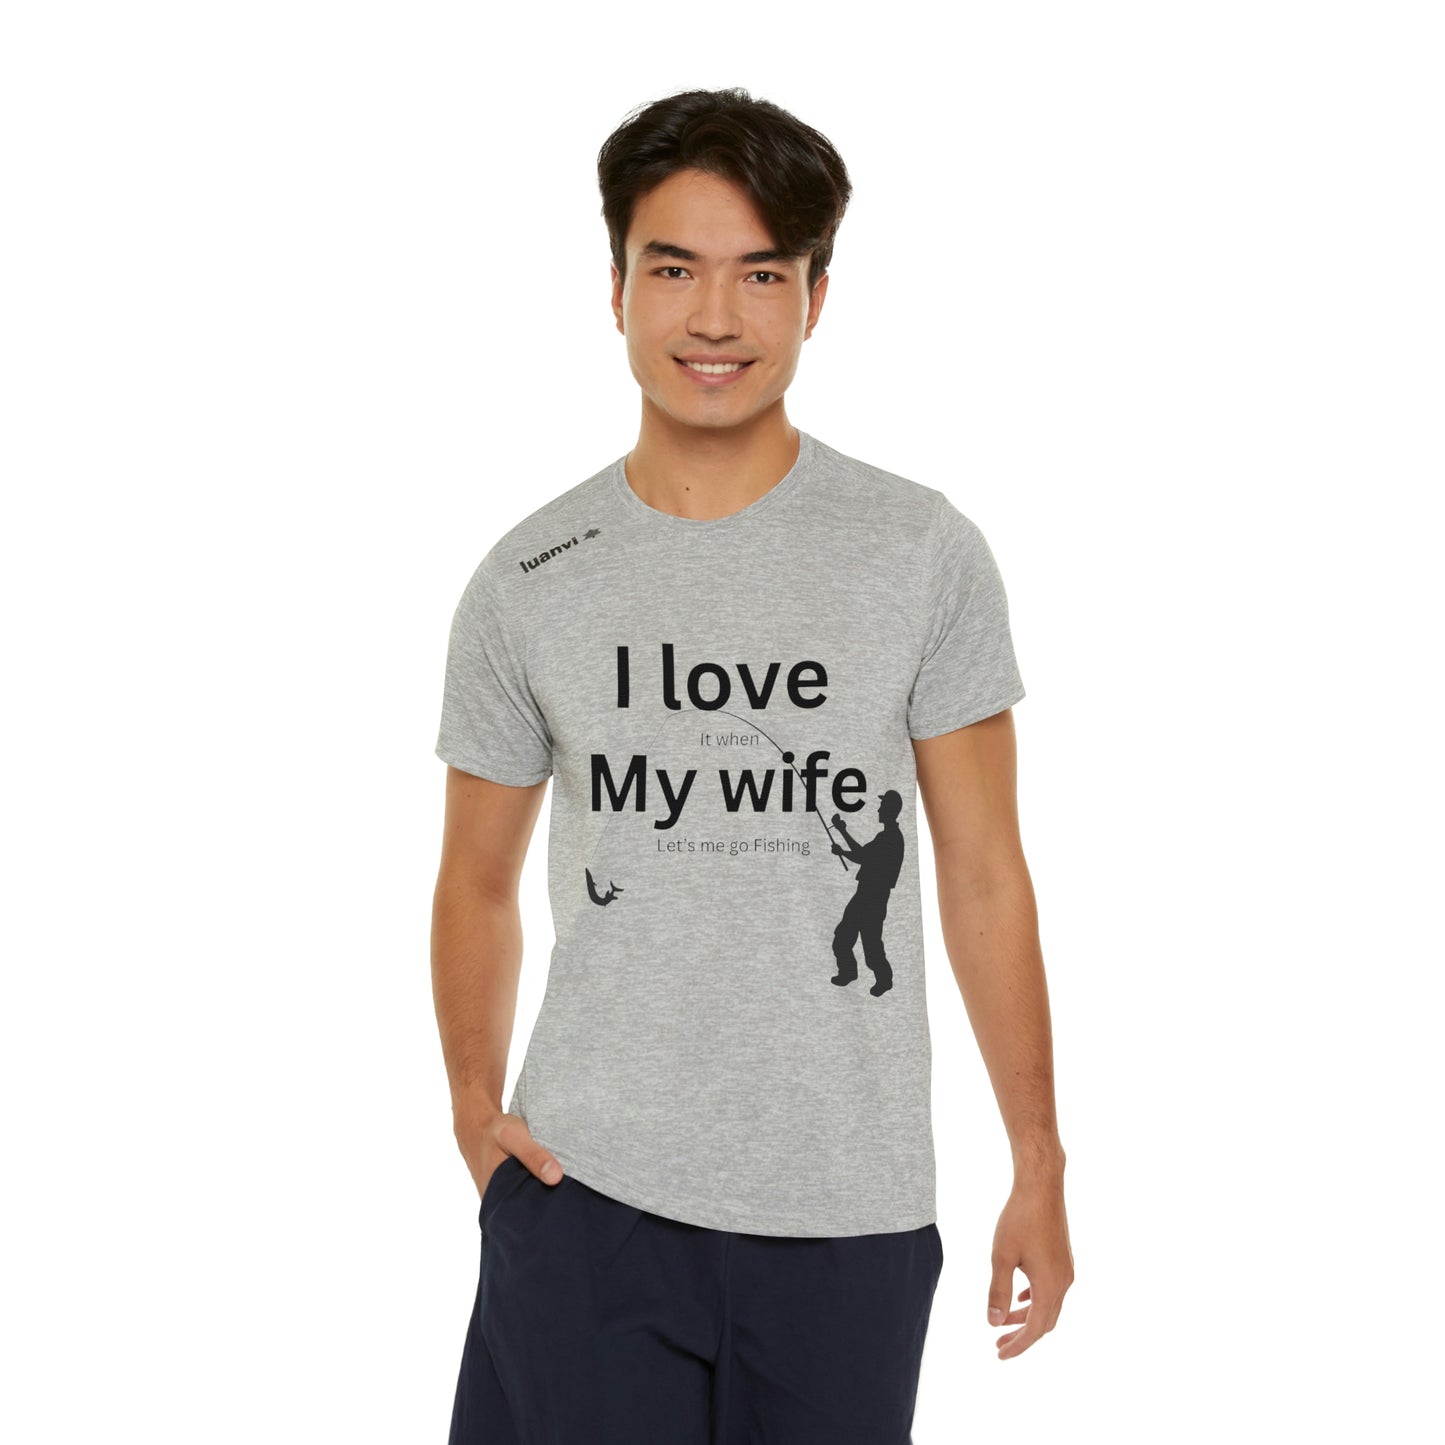 ‘I LOVE it when MY WIFE lets me go fishing’ Printed Front & Back.  Men's Sports T-shirt